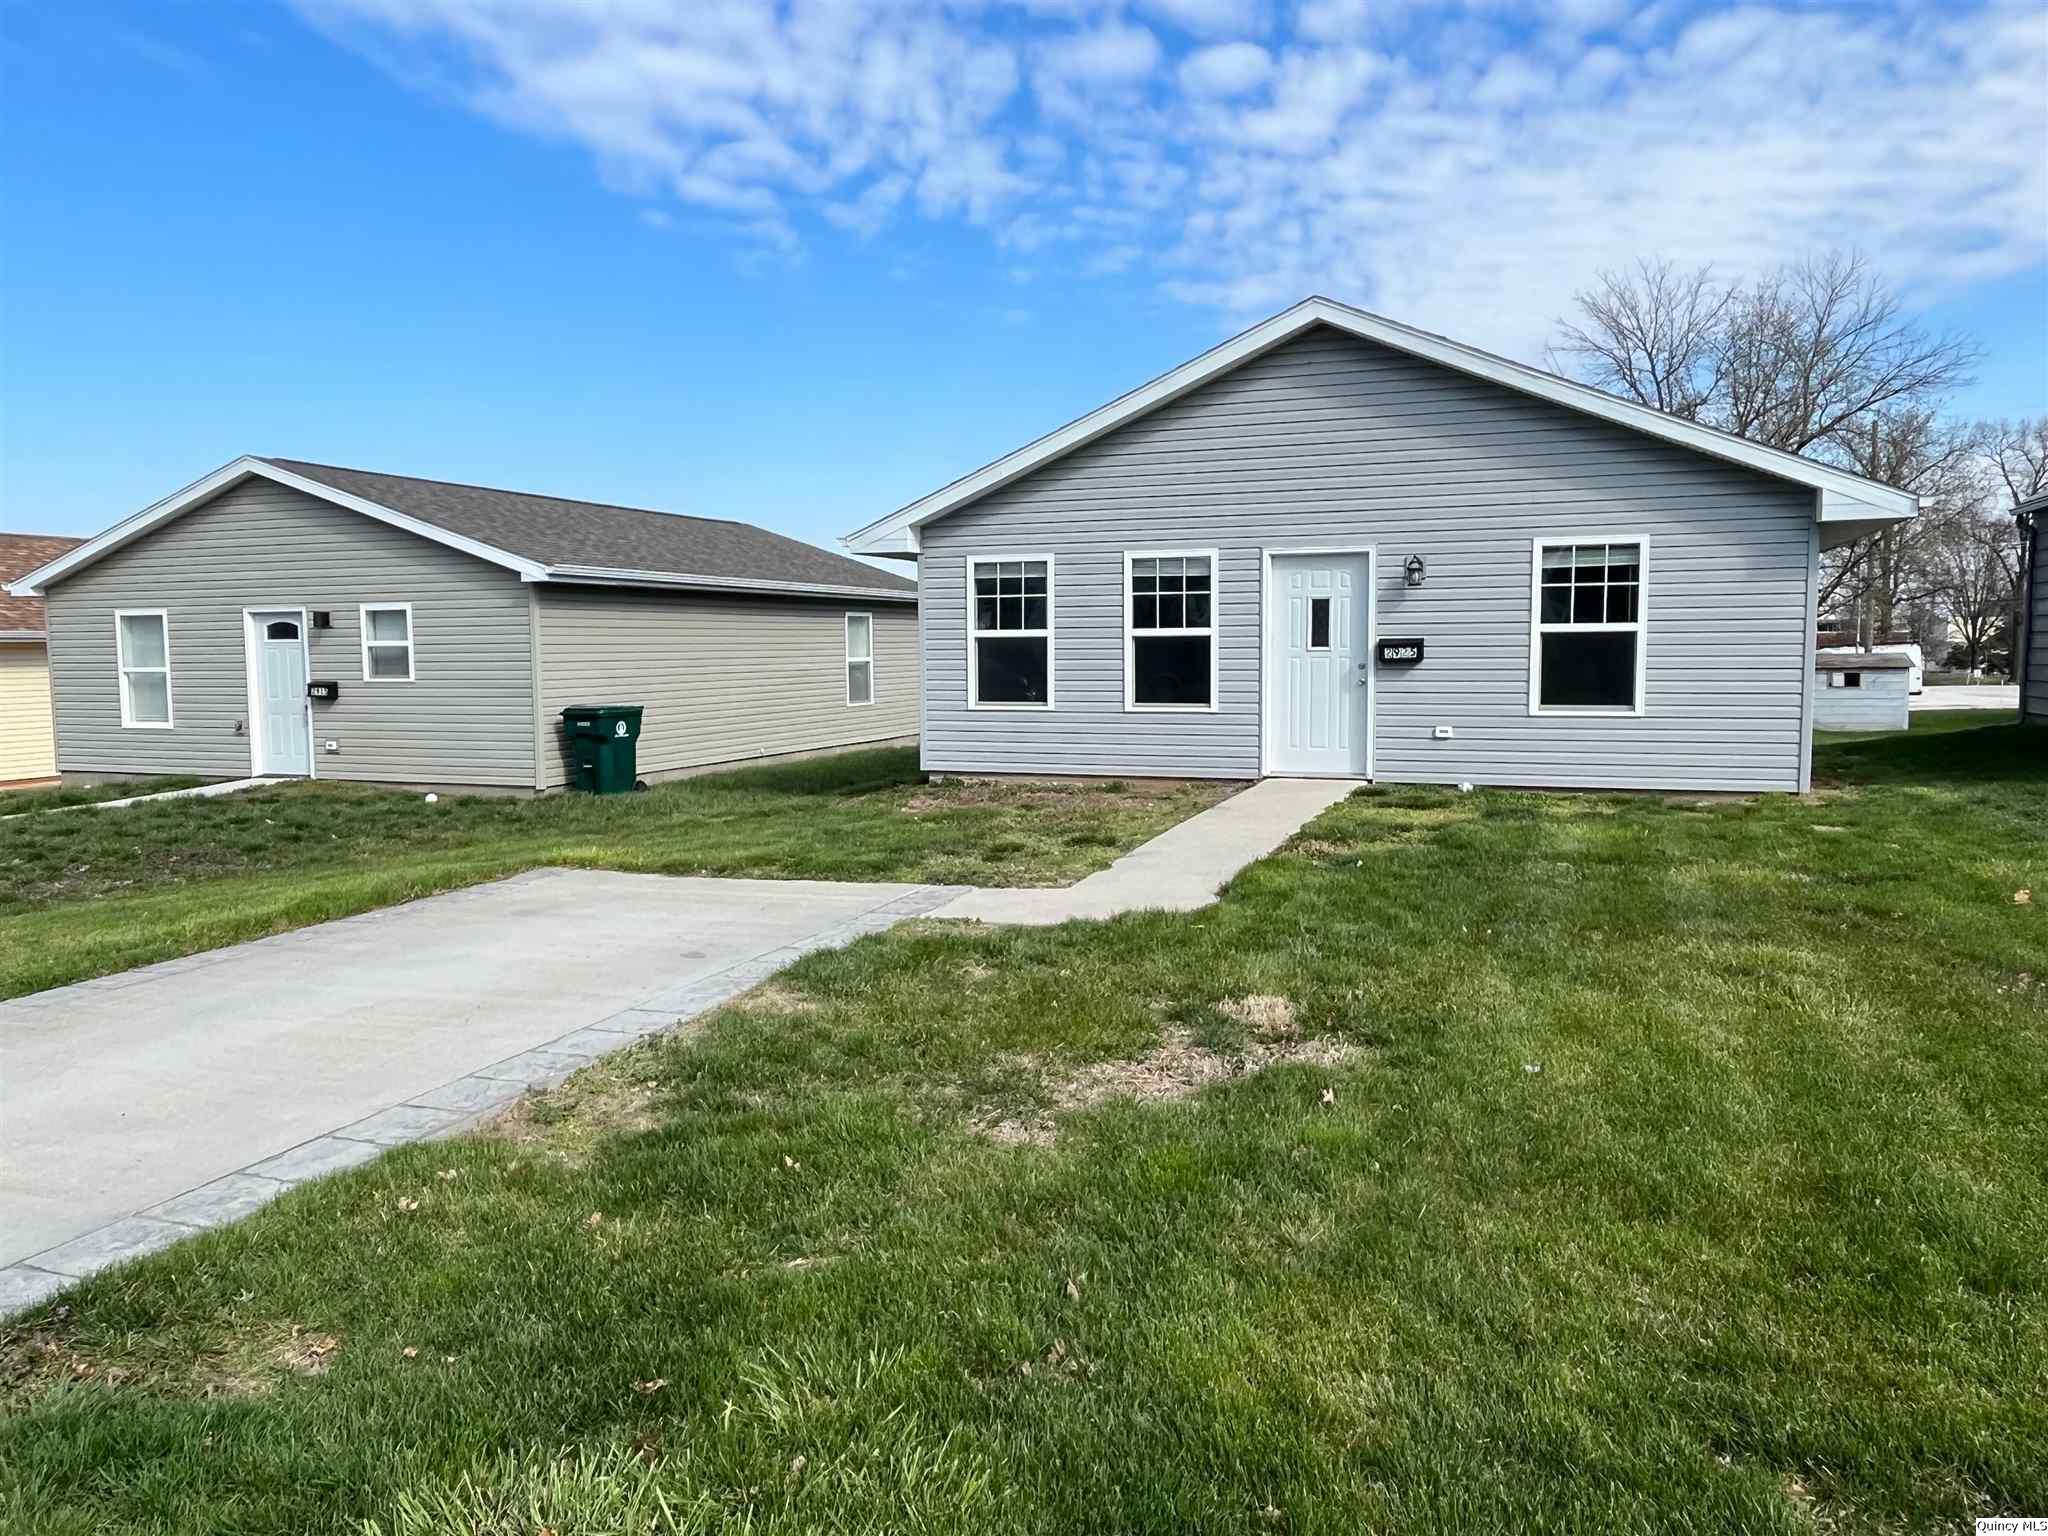 2925 Lind St., Quincy, Illinois 62301, 2 Bedrooms Bedrooms, ,1 BathroomBathrooms,Residential,For Sale,2925 Lind St.,203321